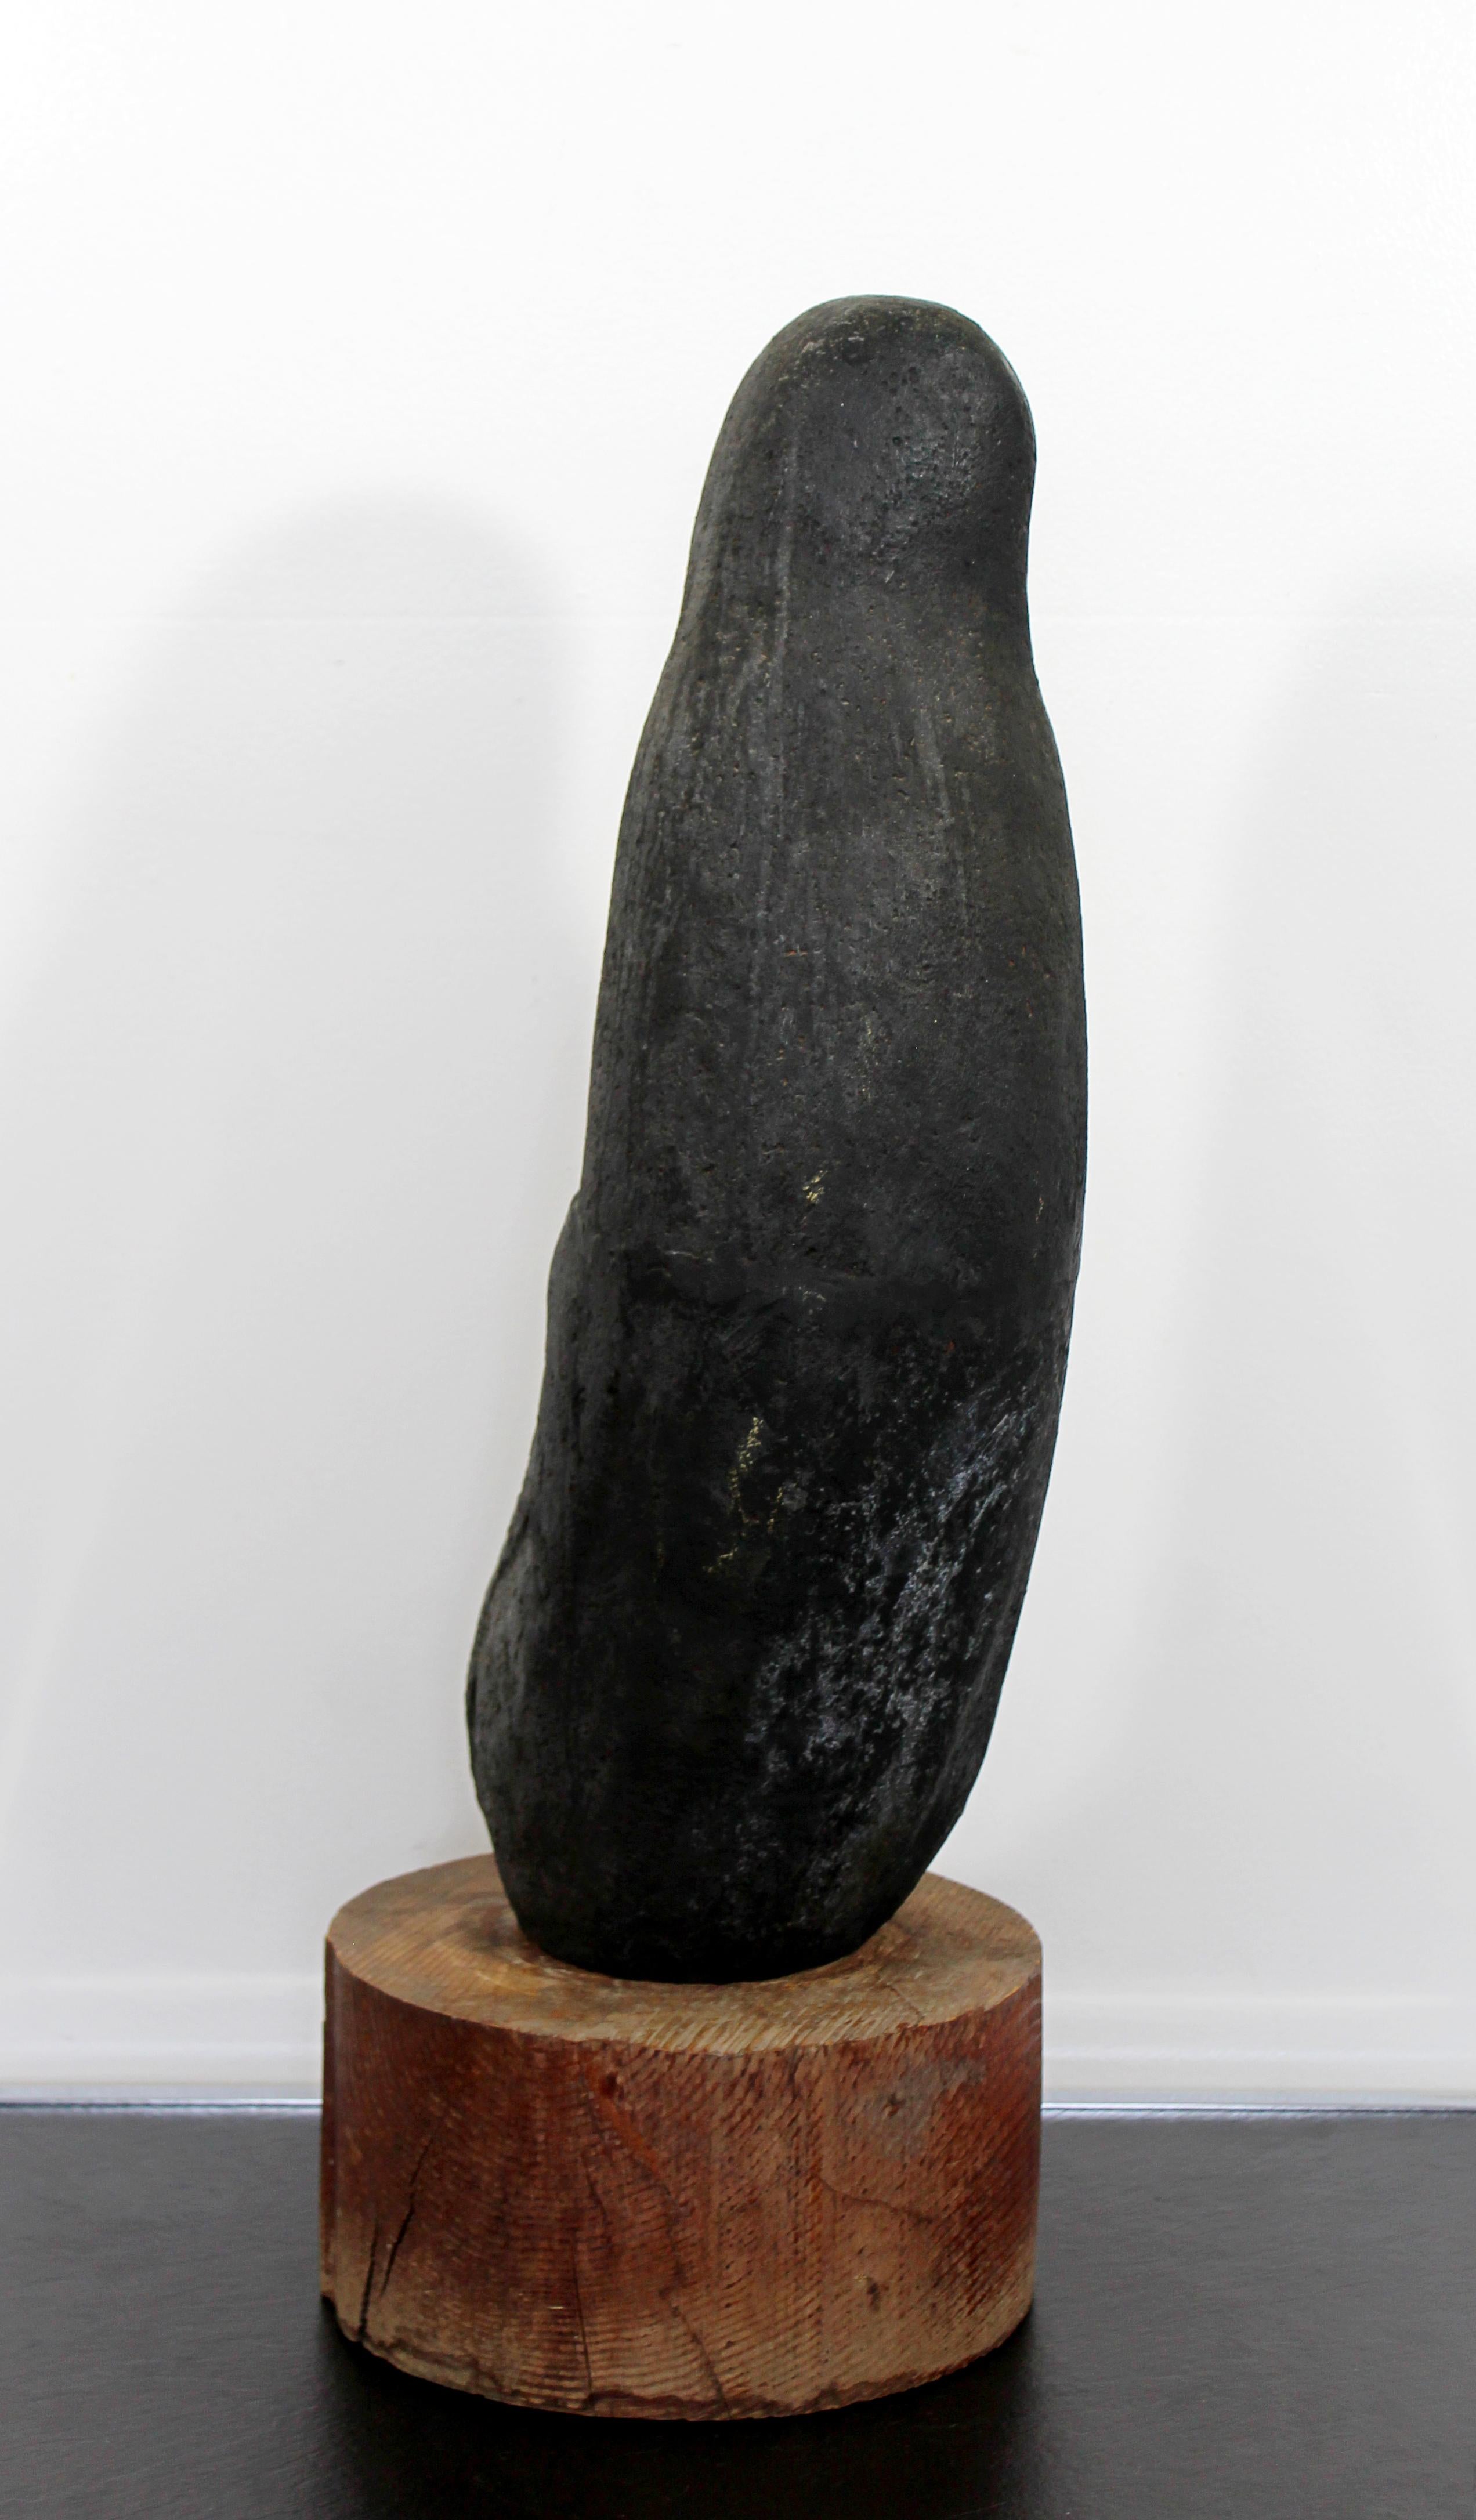 Late 20th Century Mid-Century Modern Porous Stone Table Sculpture Abstracted Figure on Wood Base